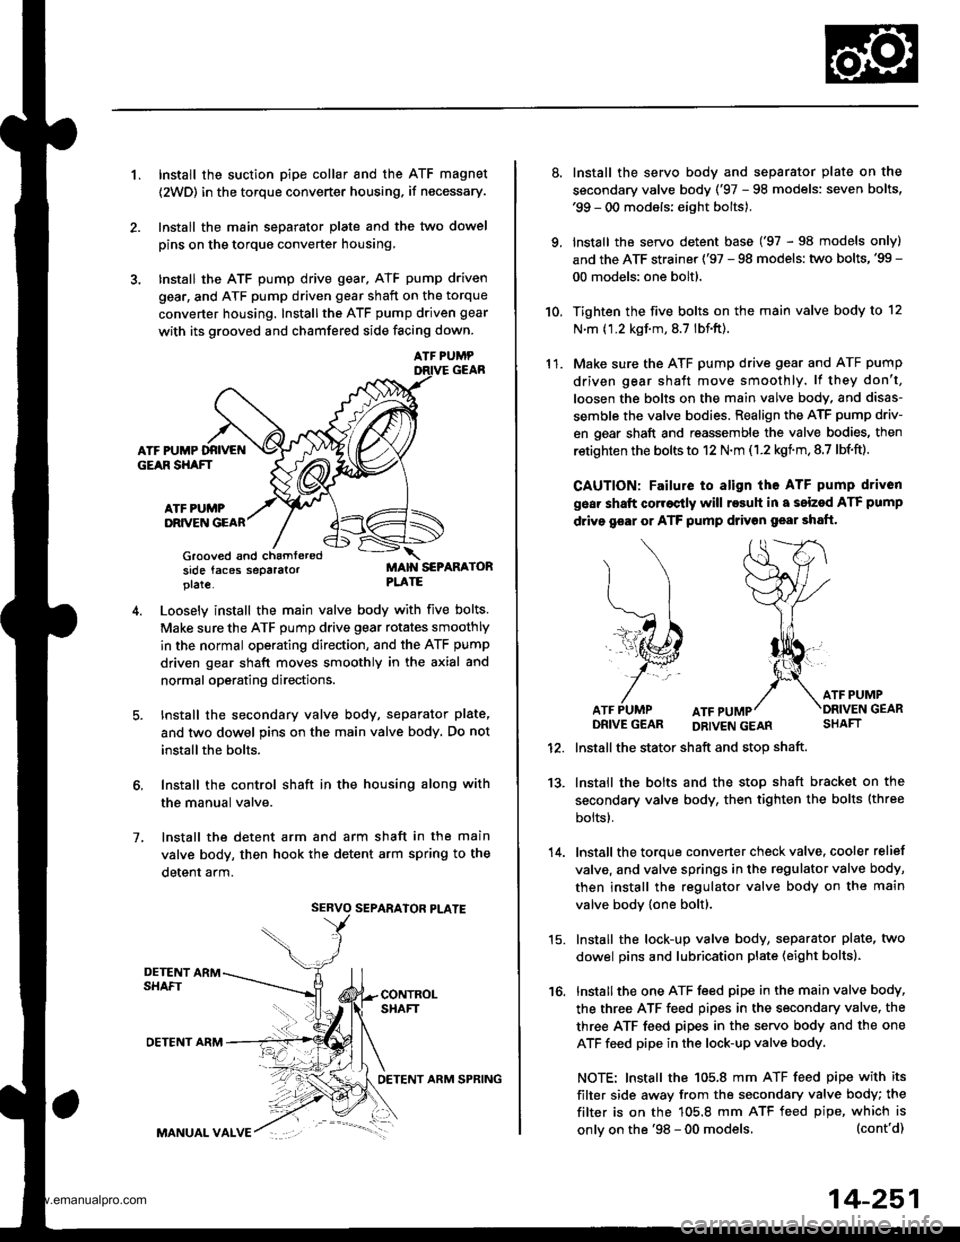 HONDA CR-V 1999 RD1-RD3 / 1.G Service Manual 
1.Install the suction pipe collar and the ATF magnet
{2WD) in the torque converter housing, if necessary.
lnstall the main seDarator Dlate and the two dowel
pins on the torque converter housing,
Inst